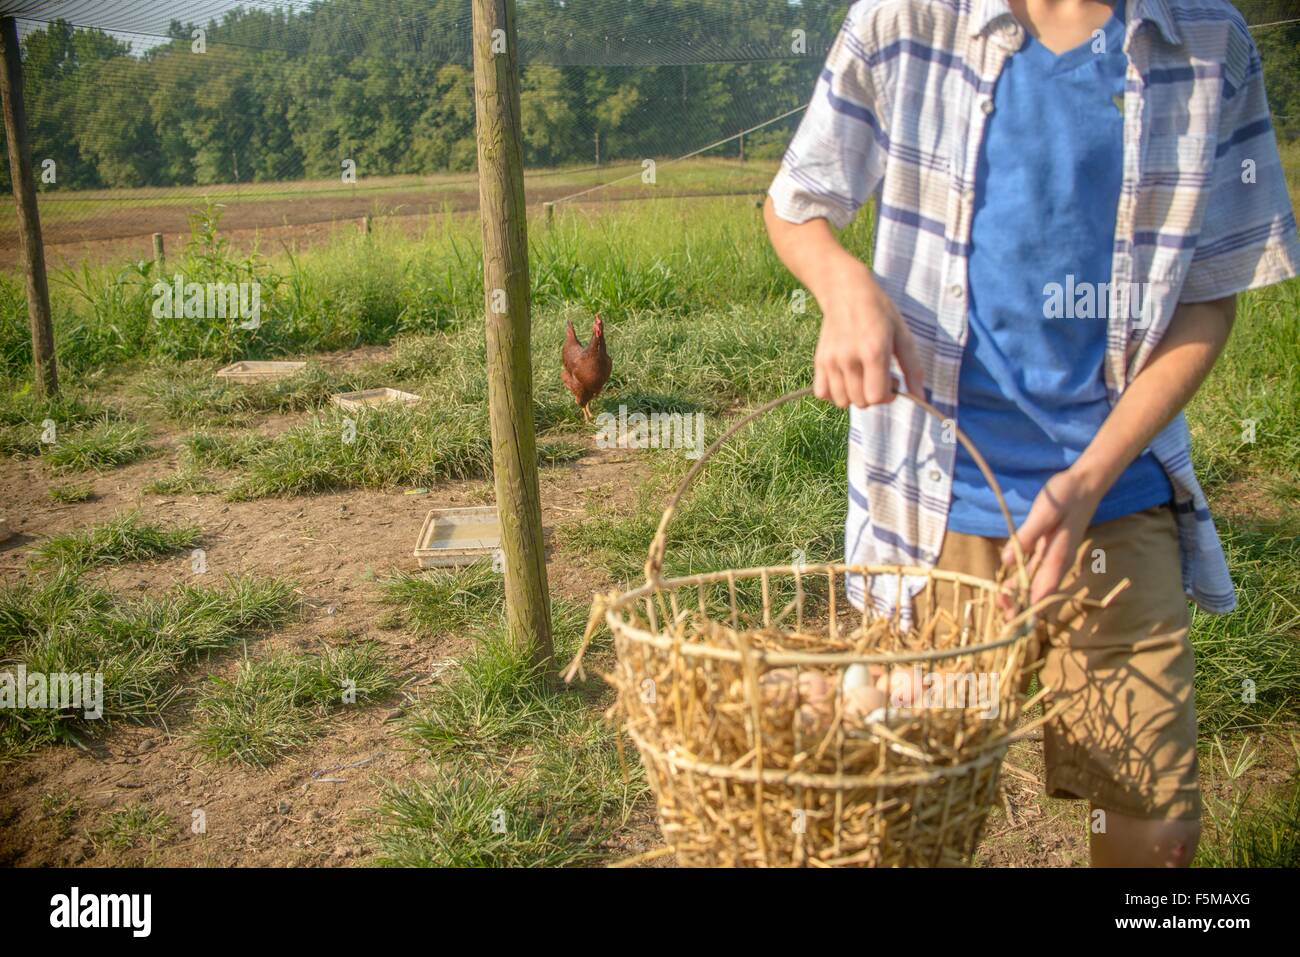 Cropped shot of boy carrying basket of eggs in field Stock Photo